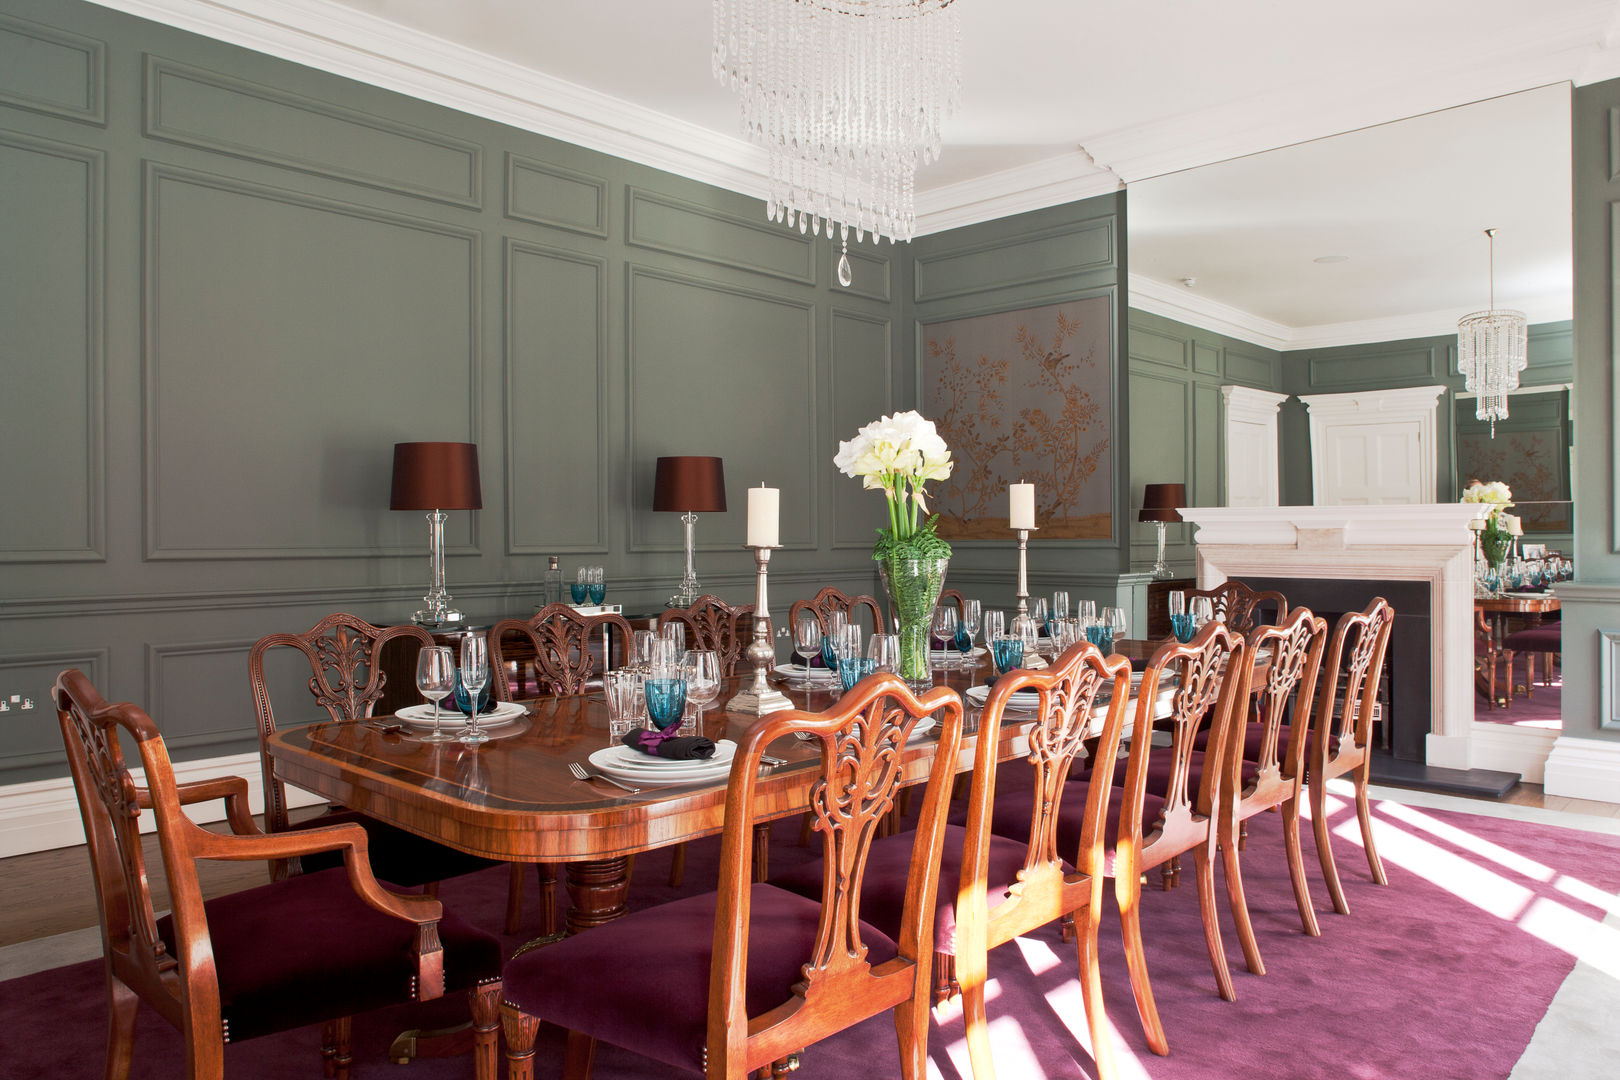 Dining Area Roselind Wilson Design モダンデザインの ダイニング dining room,dining table,lamps,wall panelling,flowers,mirror,traditional,interior design